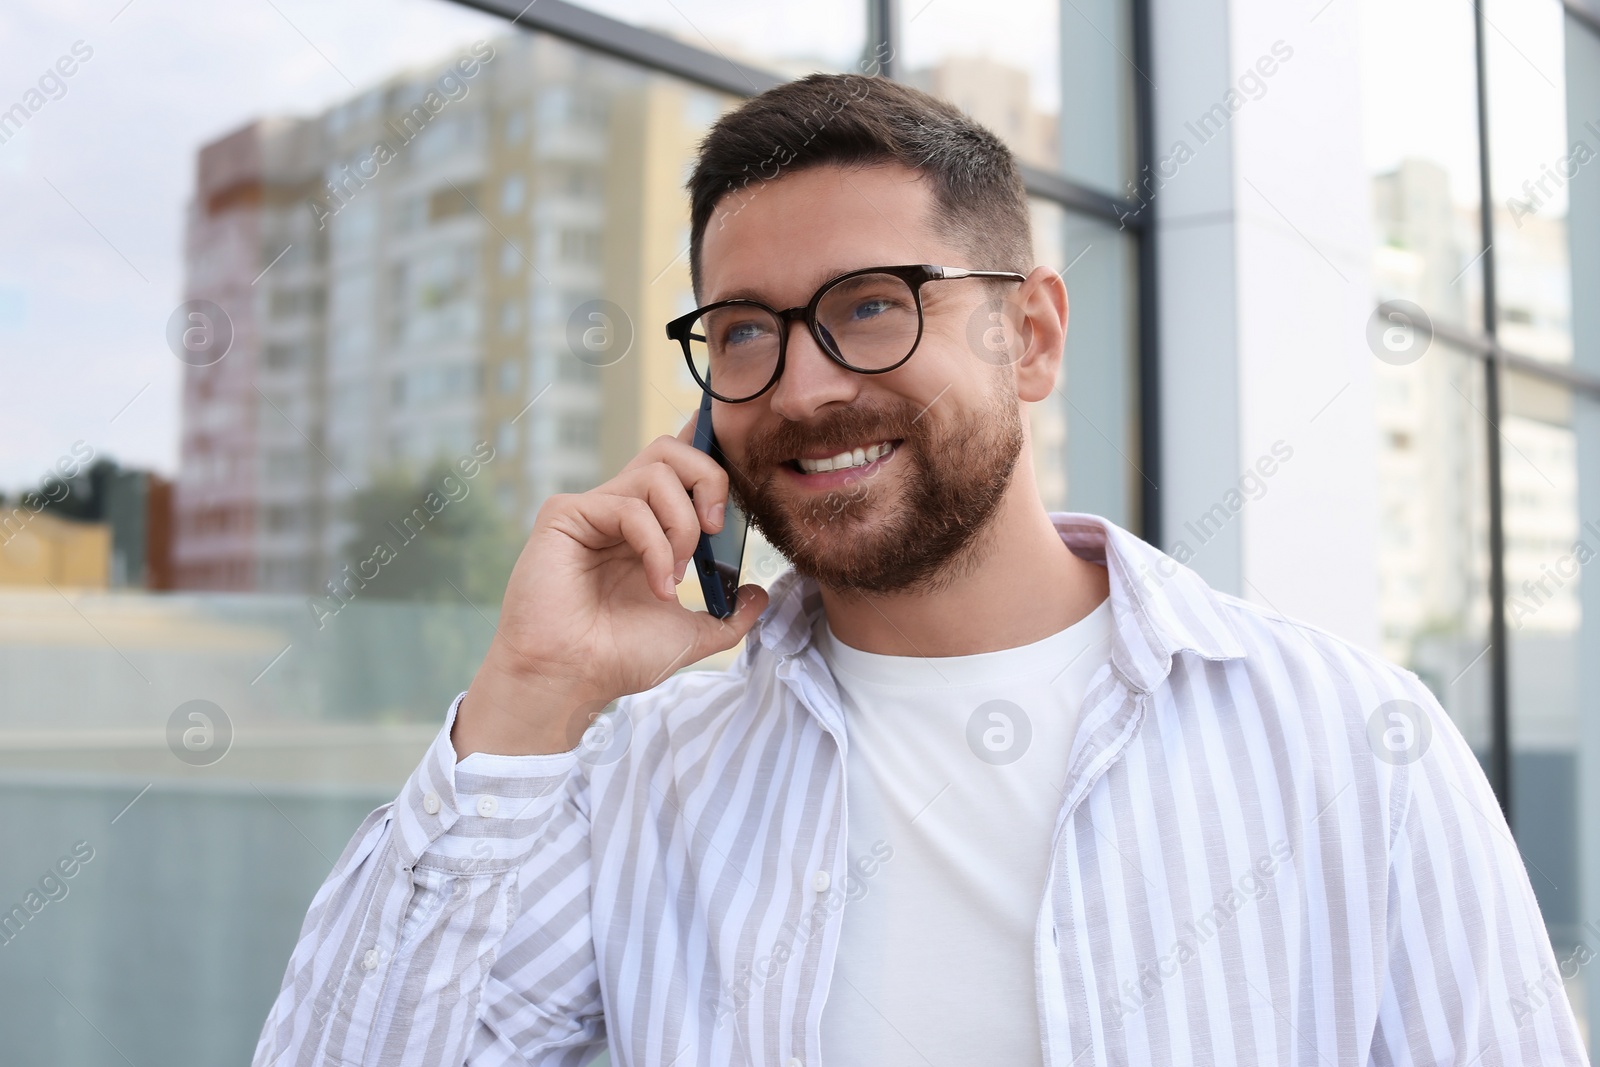 Photo of Handsome bearded man in glasses talking on phone outdoors